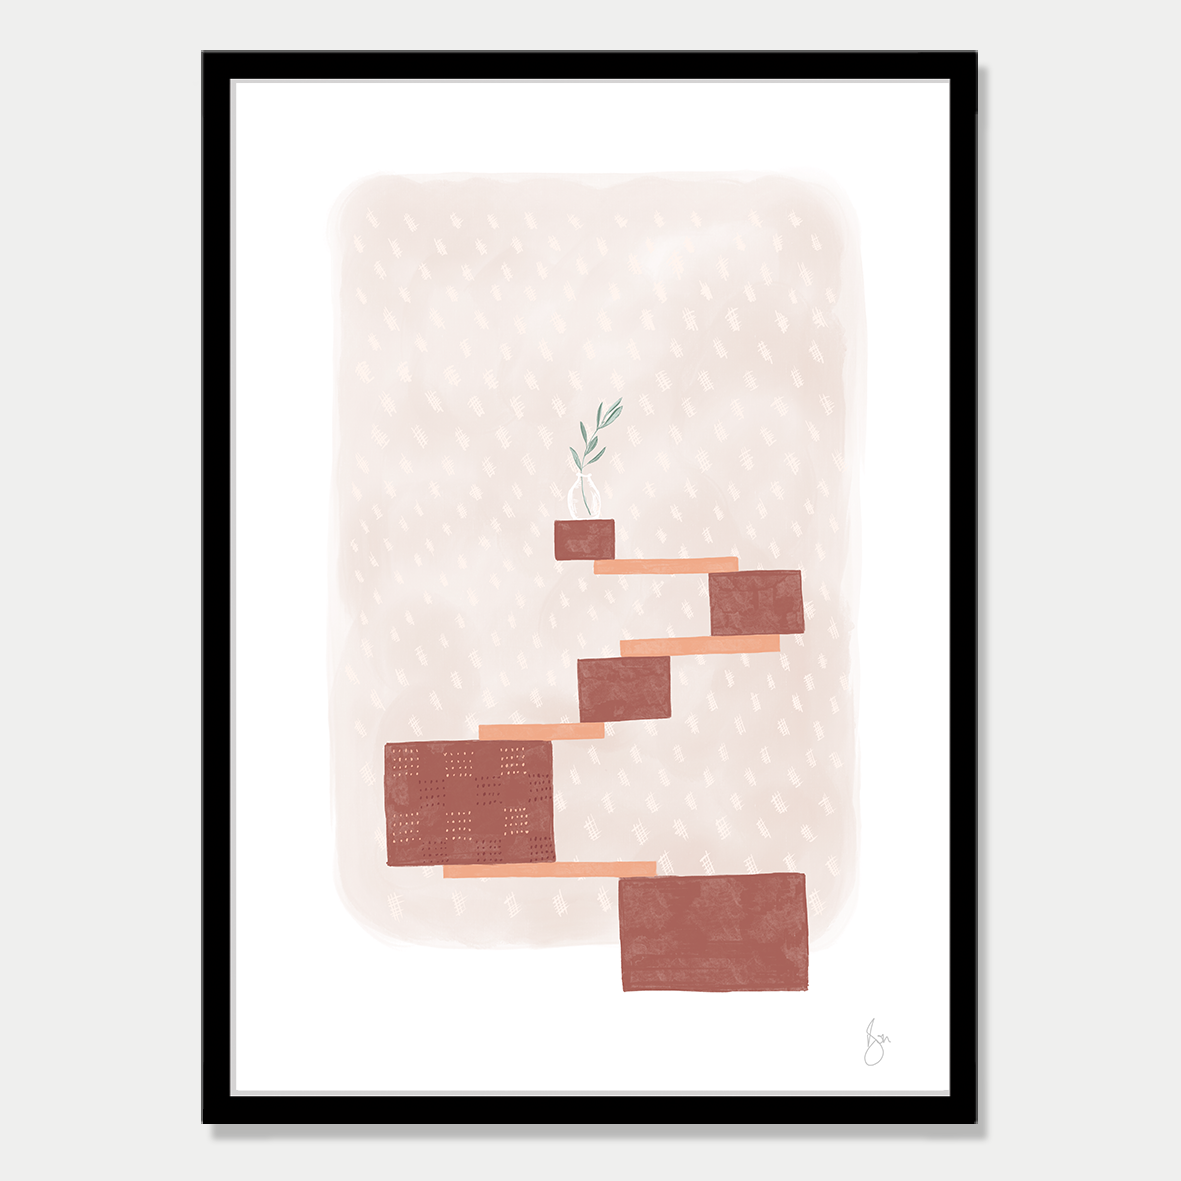 Art print of several blocks balancing with a olive branch in a vase sitting on top, in soft autumn colour palette by Bon Jung. Printed in New Zealand by endemicworld and framed in black